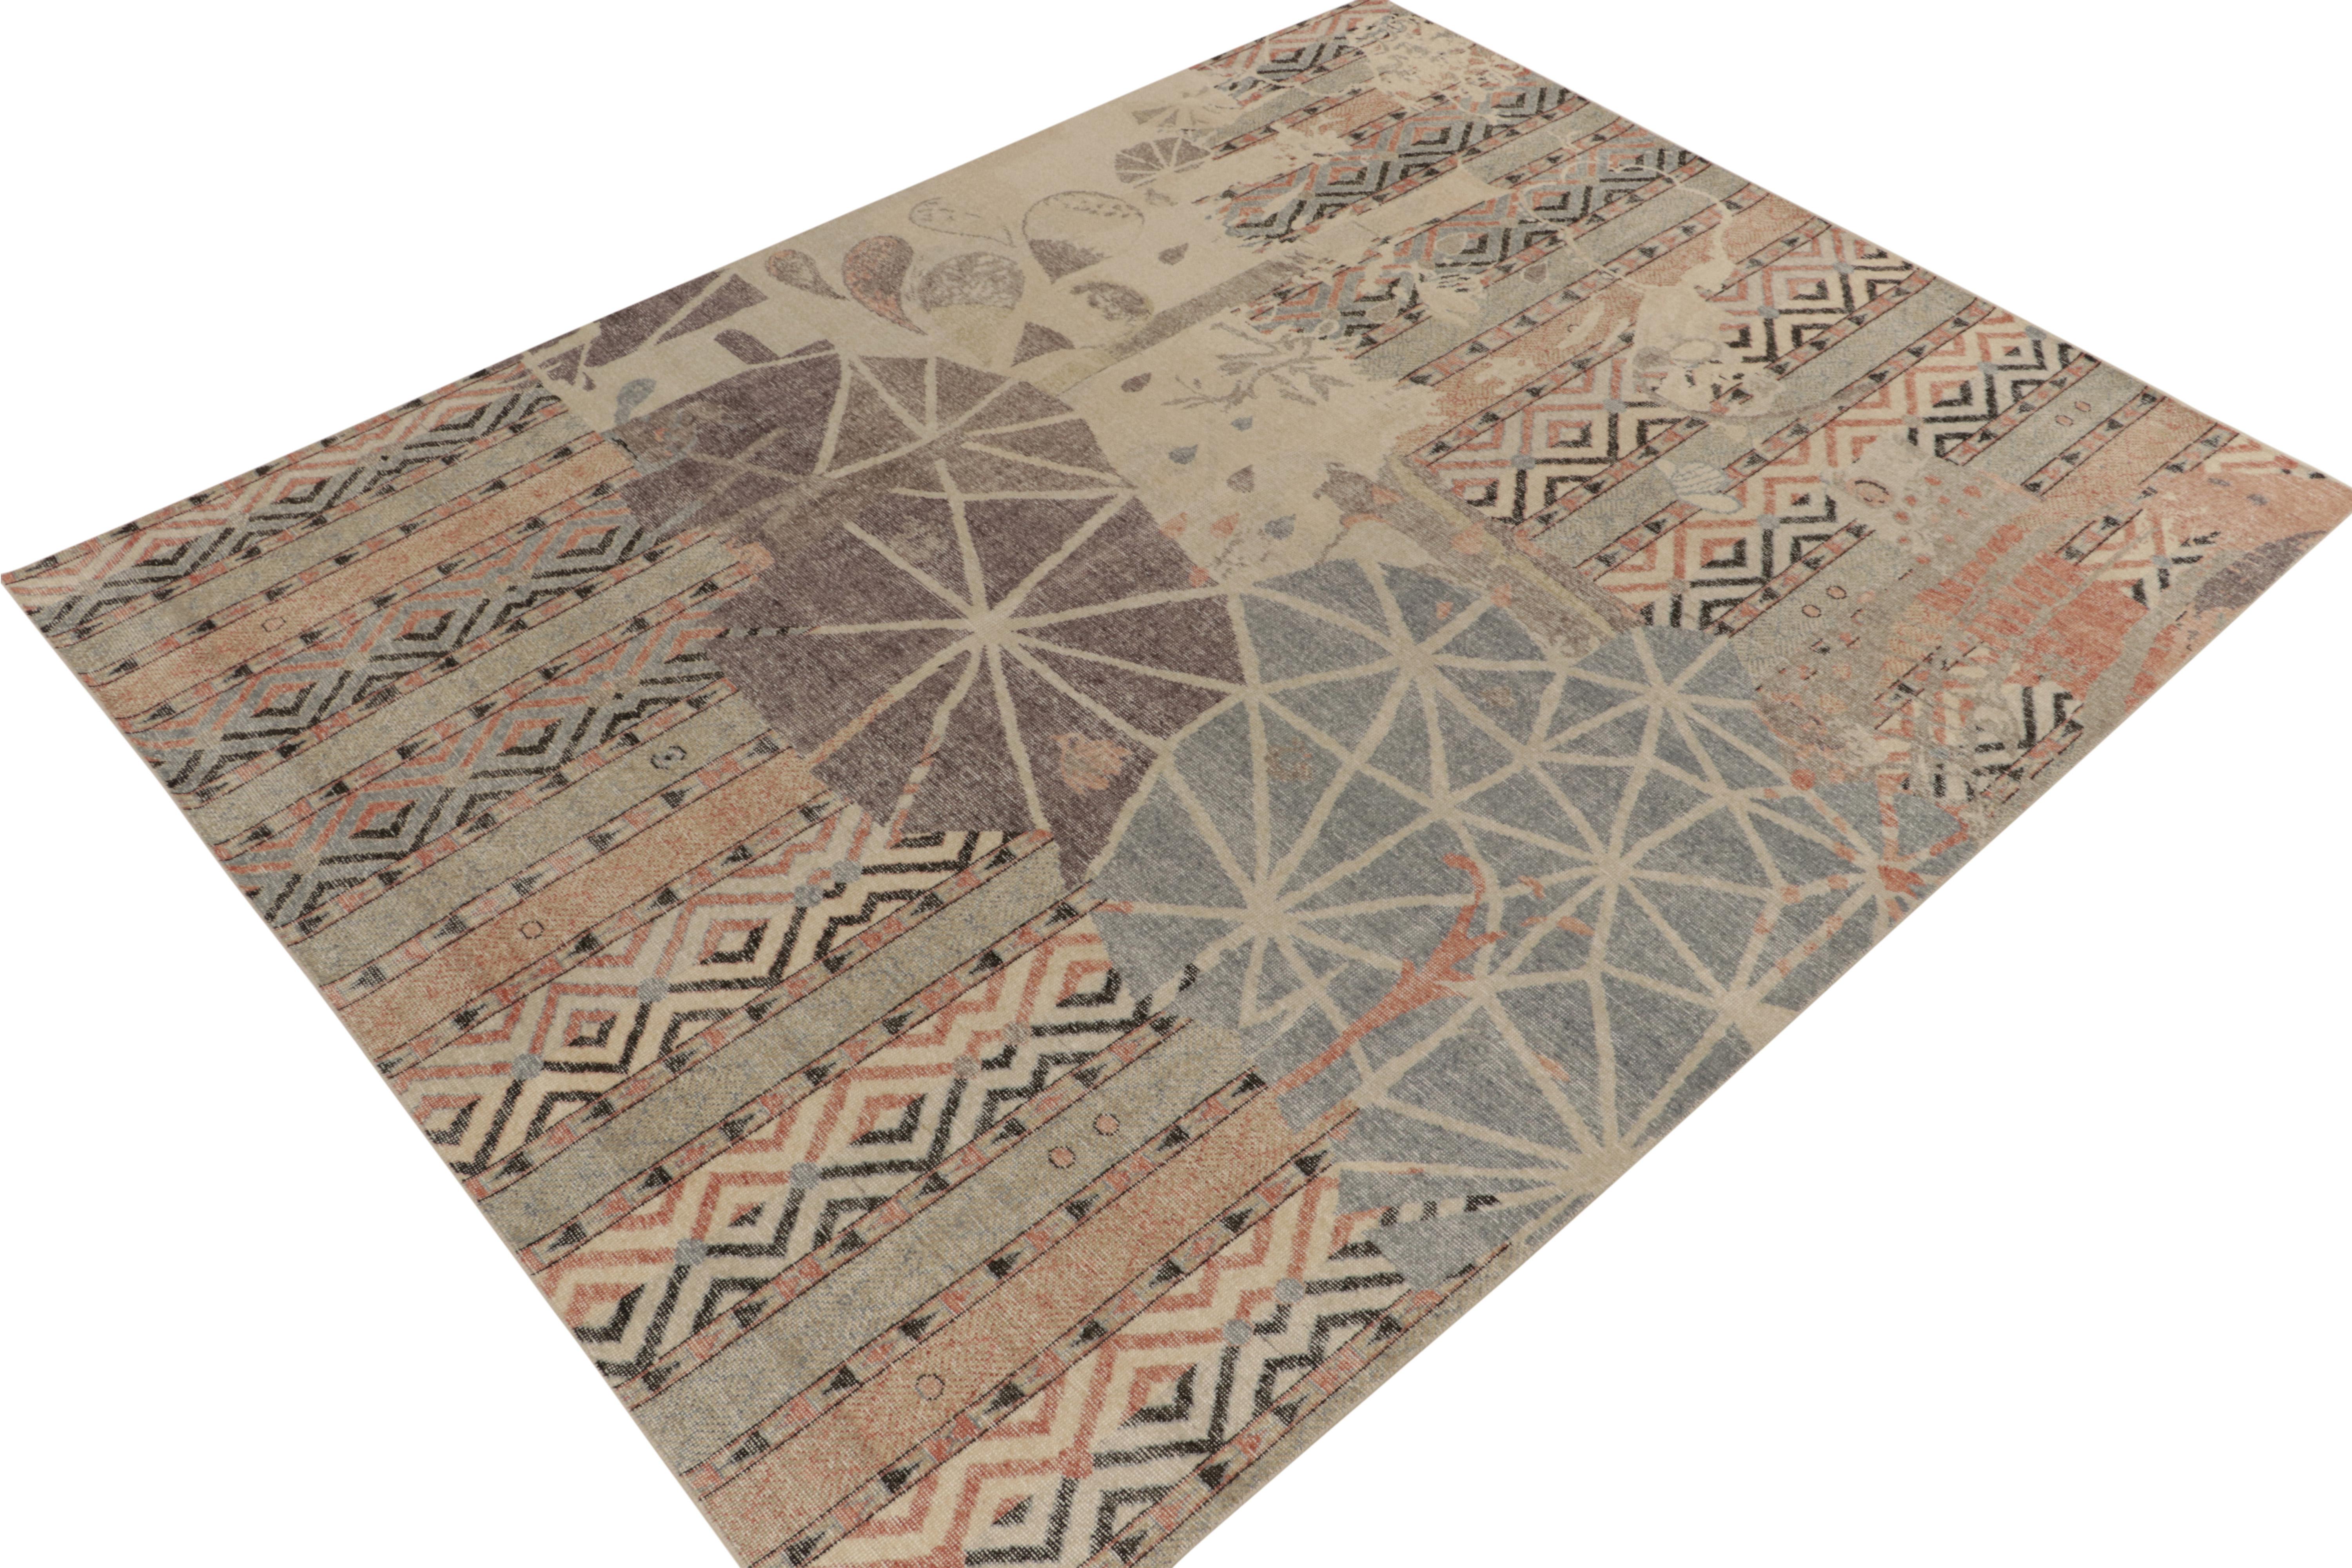 From Rug & Kilim’s Homage collection, a 9x12 distressed style rug witnessing a unique marriage of tribal and Deco elements. The vision reads a sharp geometric application for an exalted take in contemporary style emanating an enigmatic vibe in